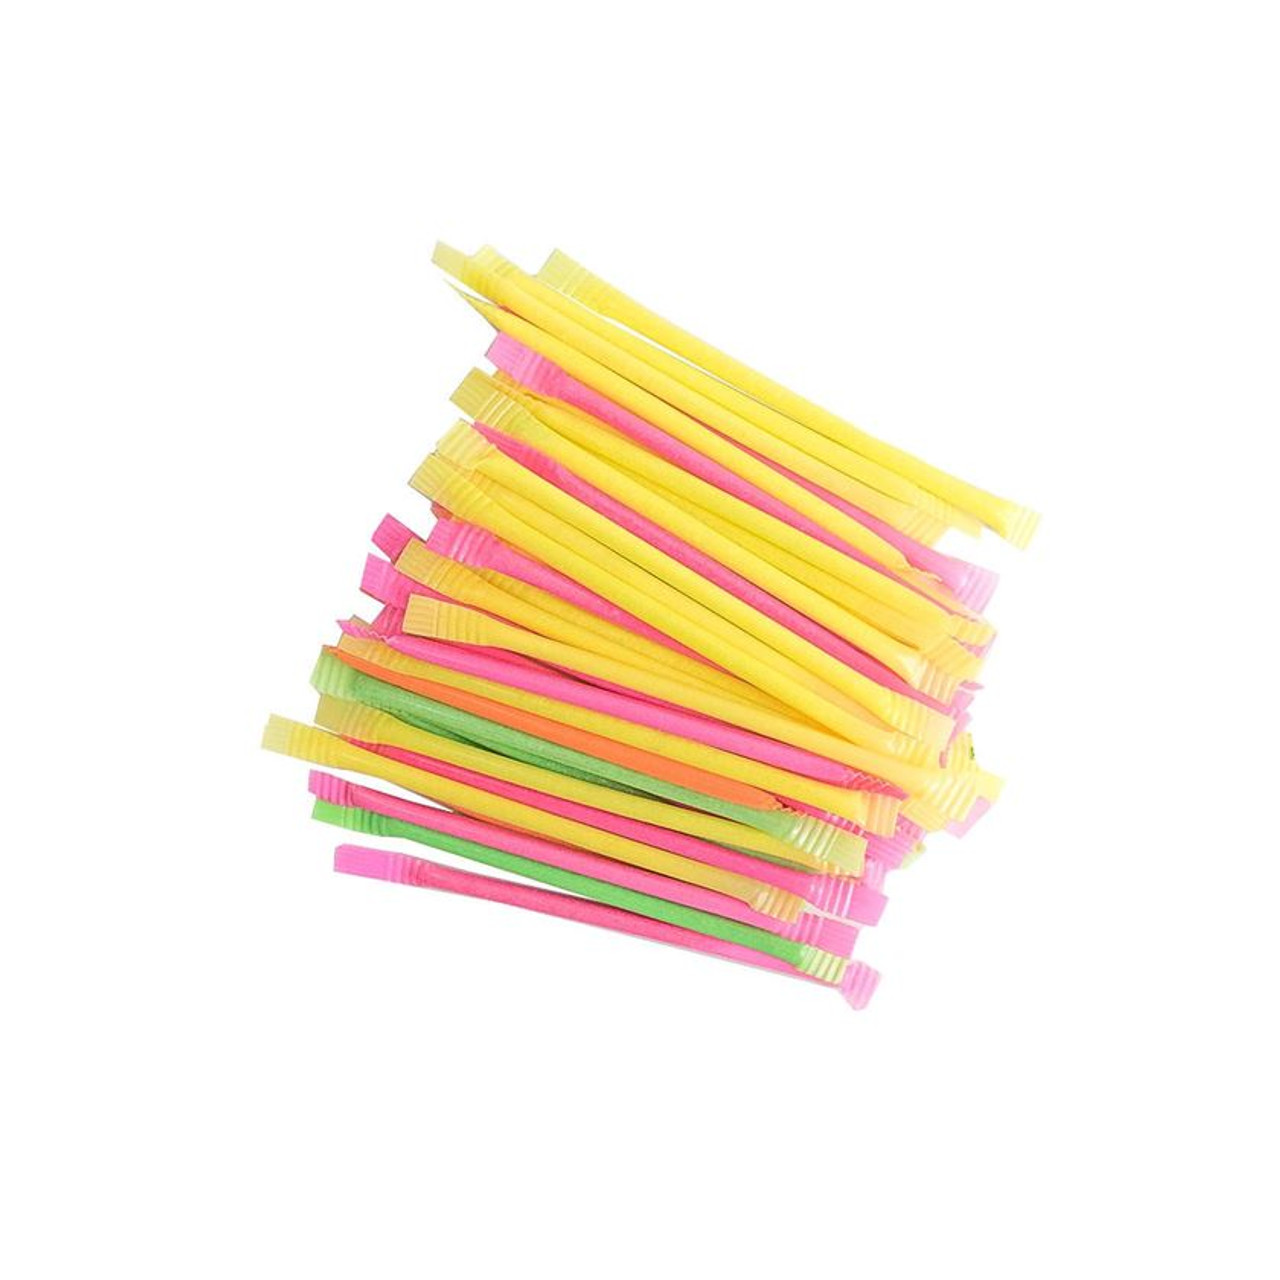 https://cdn11.bigcommerce.com/s-oxoxmgwste/images/stencil/1280x1280/products/793/8193/alberts-candy-neon-laser-straws-240-count__74396.1702578528.jpg?c=1